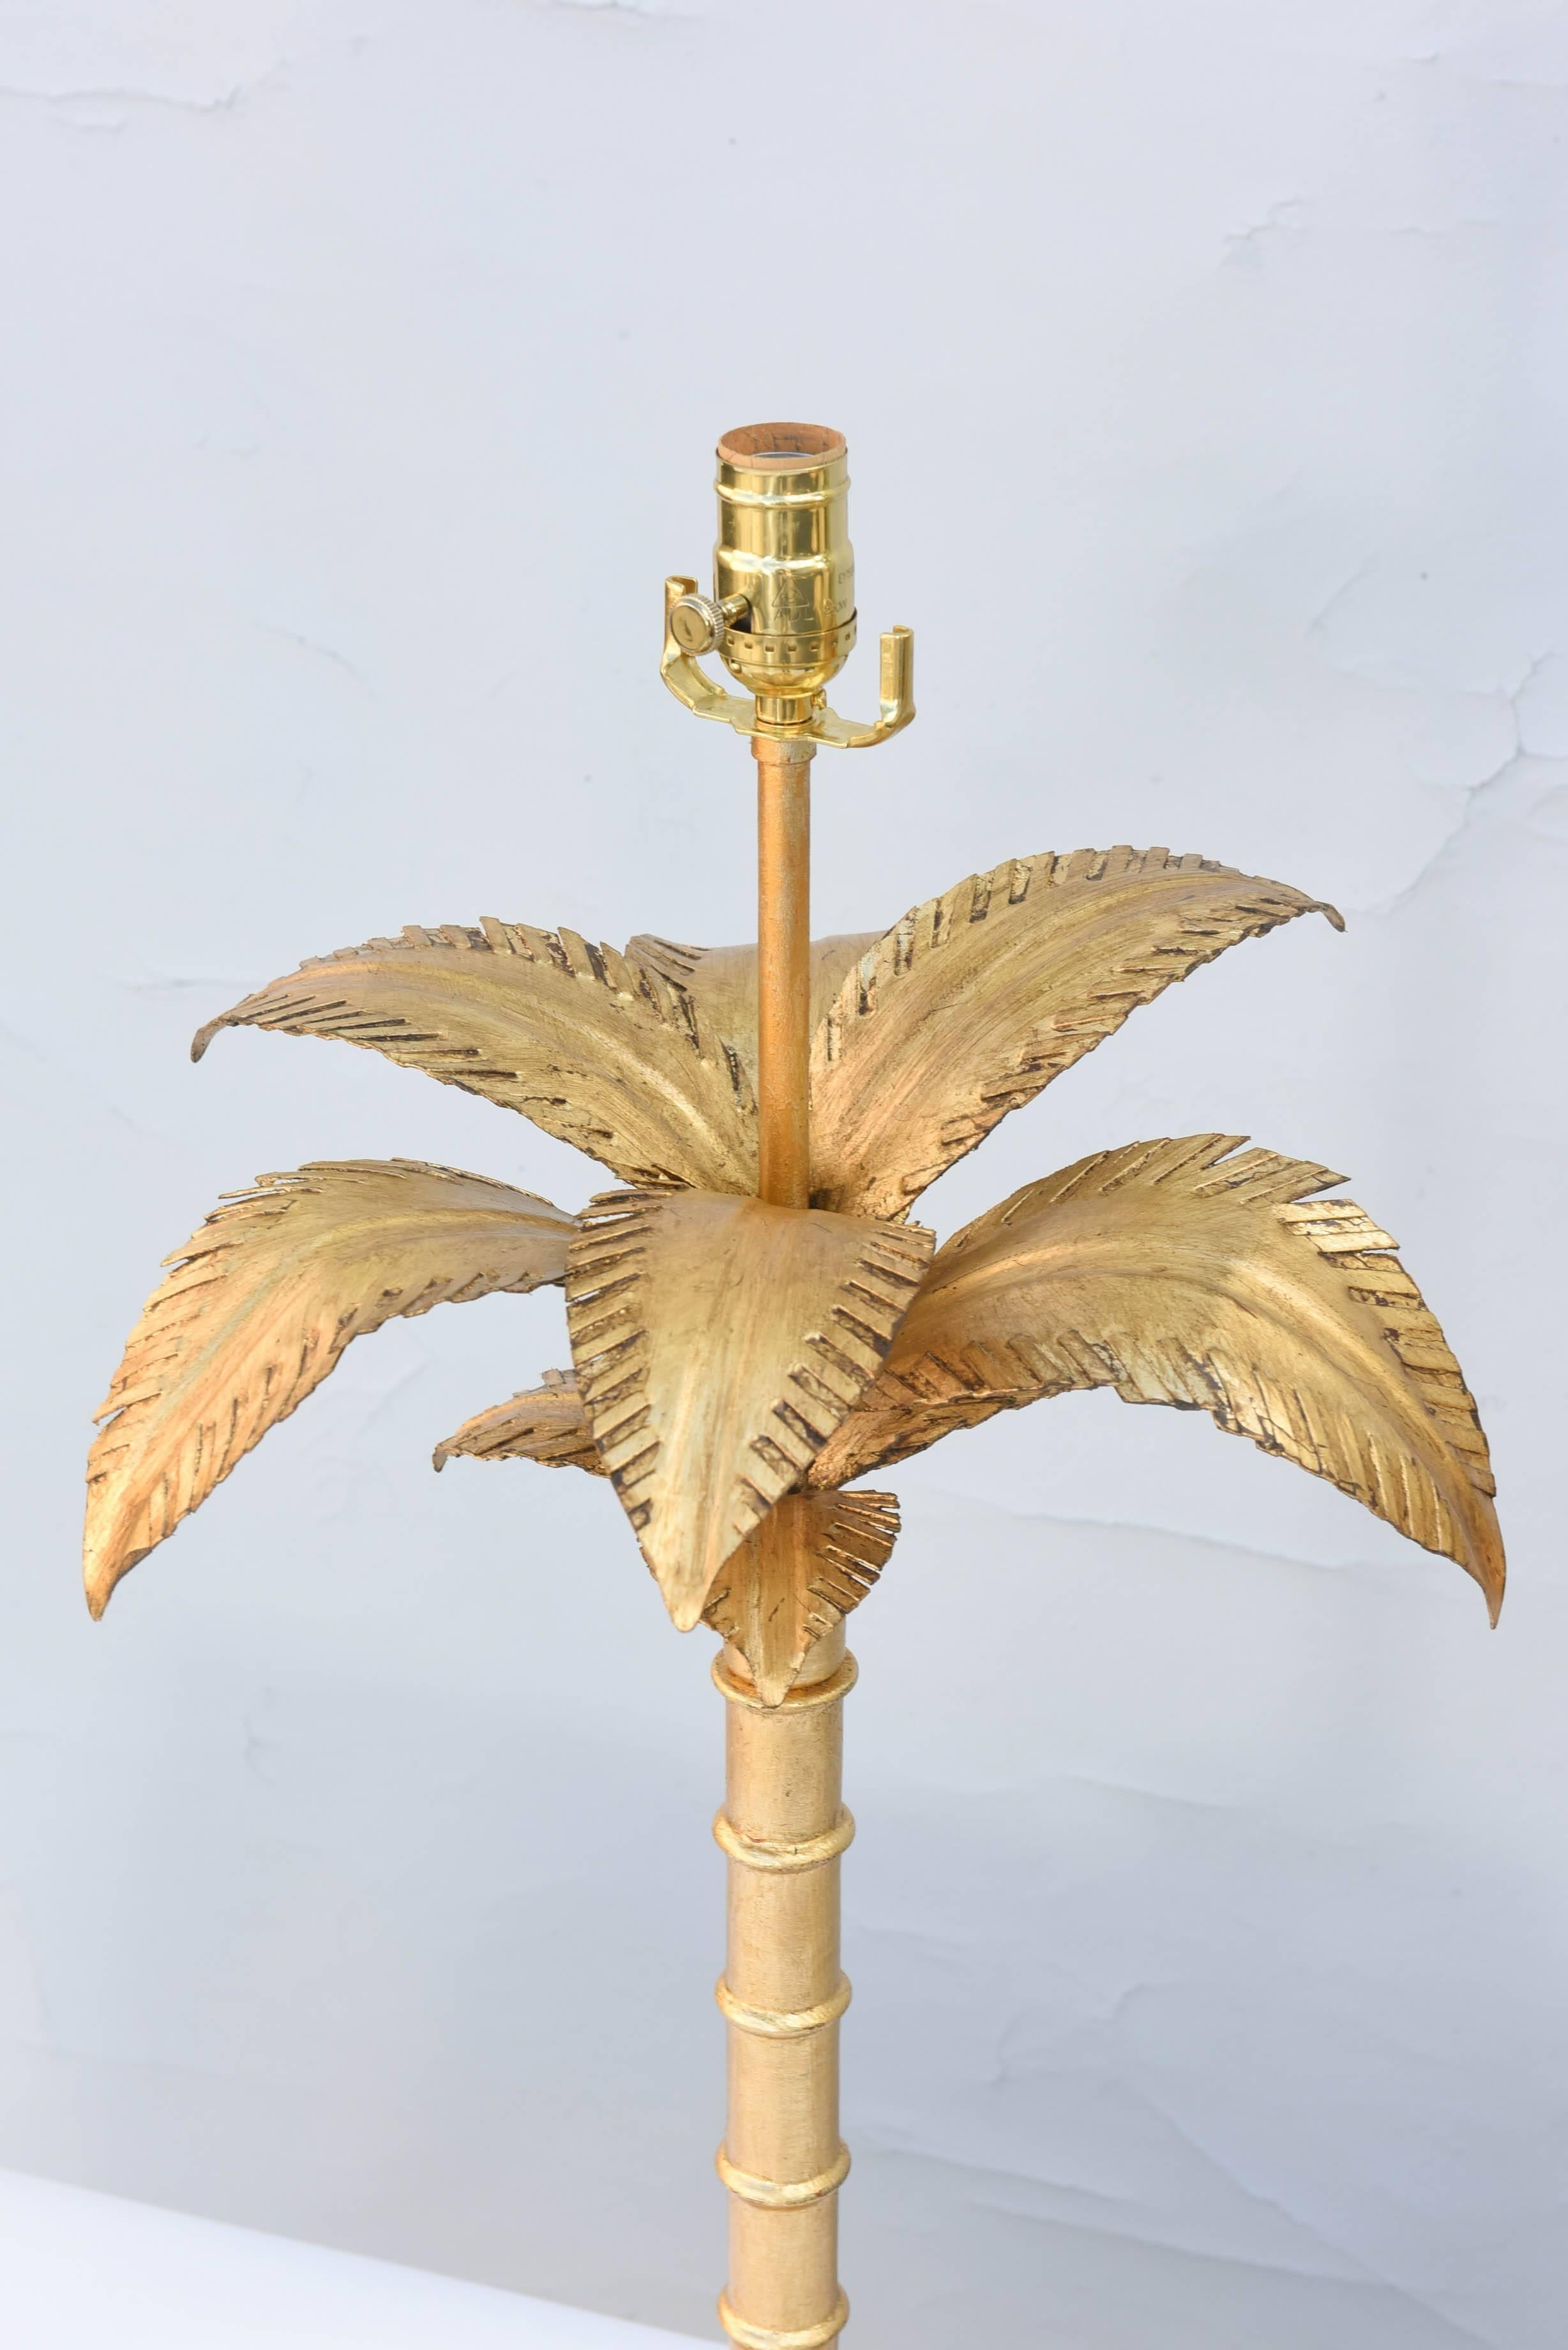 Pair of lamps, of gilded iron, each having well a well-articulated canopy of leaves, over sectioned trunk, on graduated base, set upon round plinth. 

Stock ID: D9270